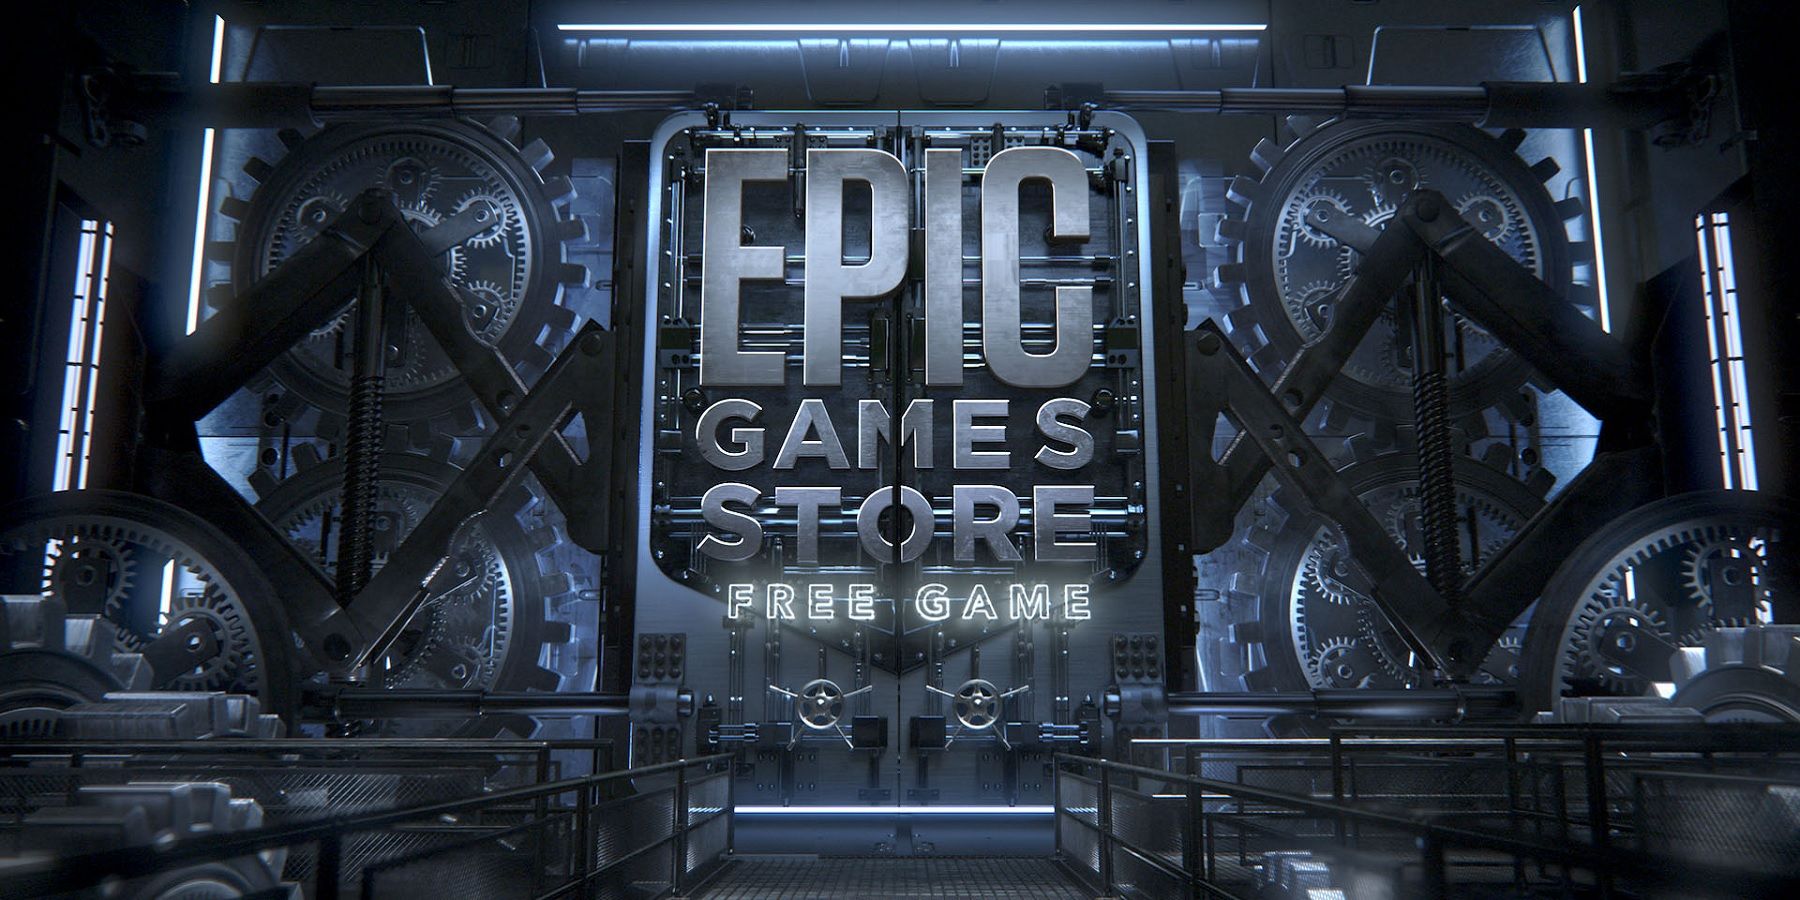 The Epic Games Store's next free titles have been confirmed